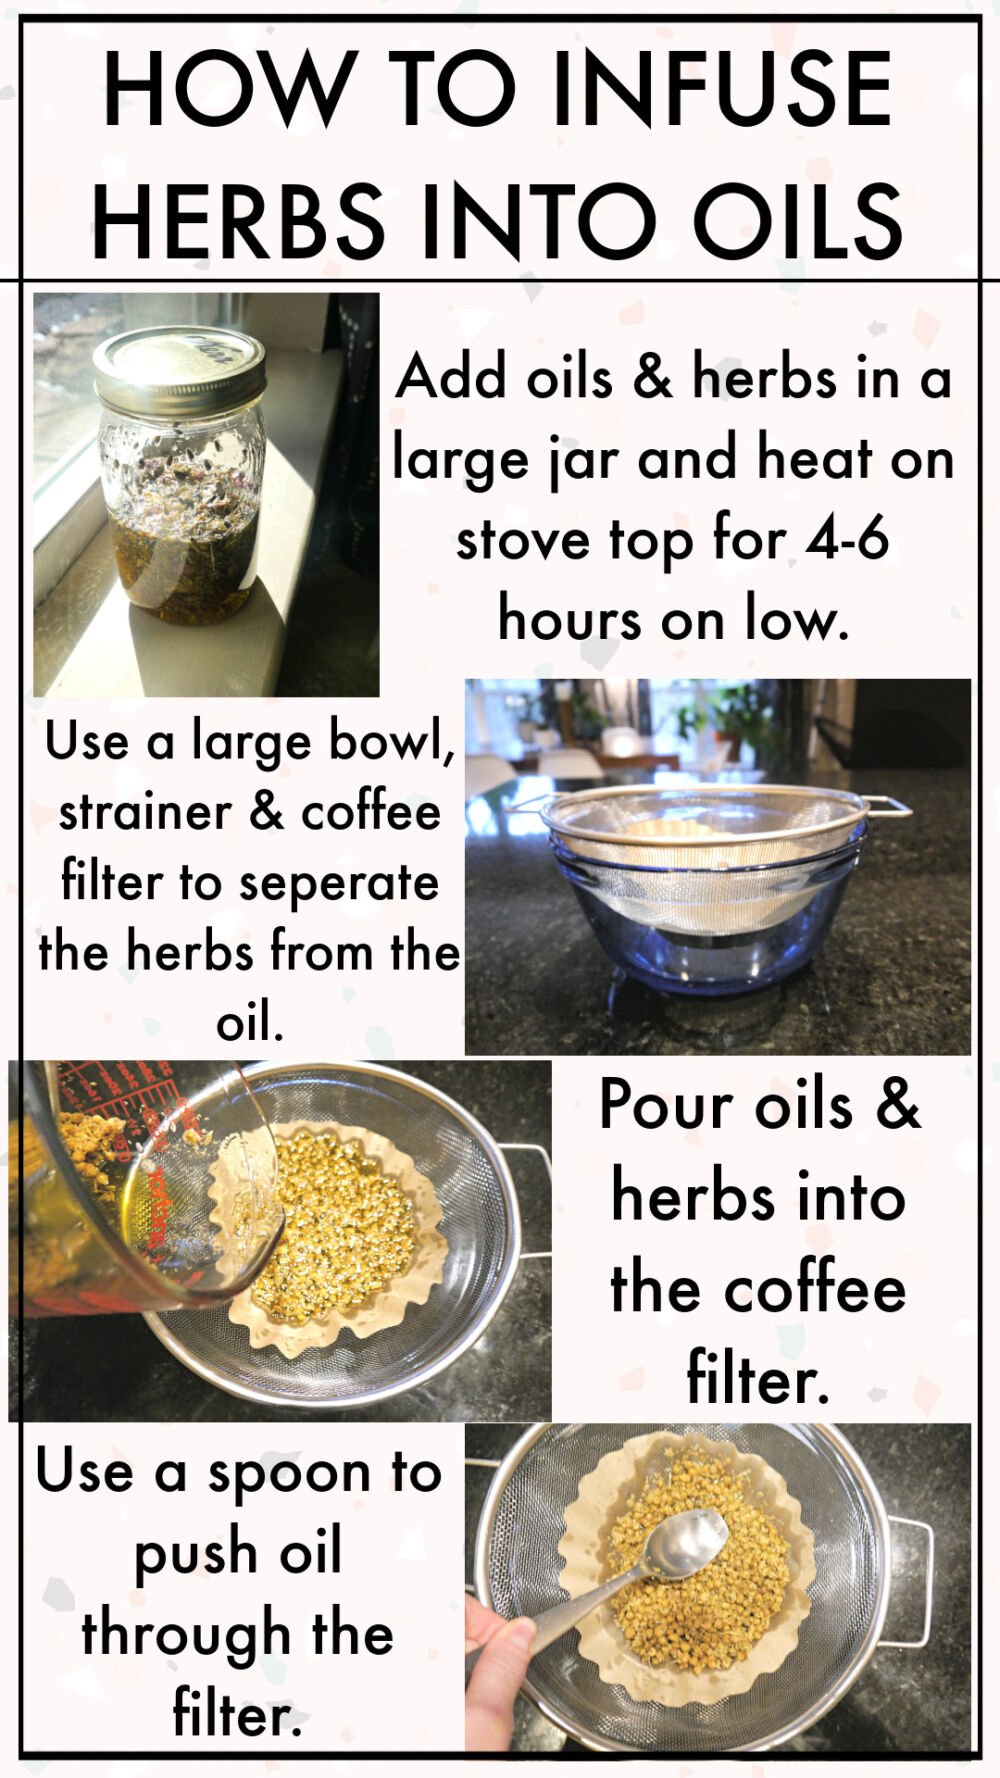 How to Infuse Oils into Herbs